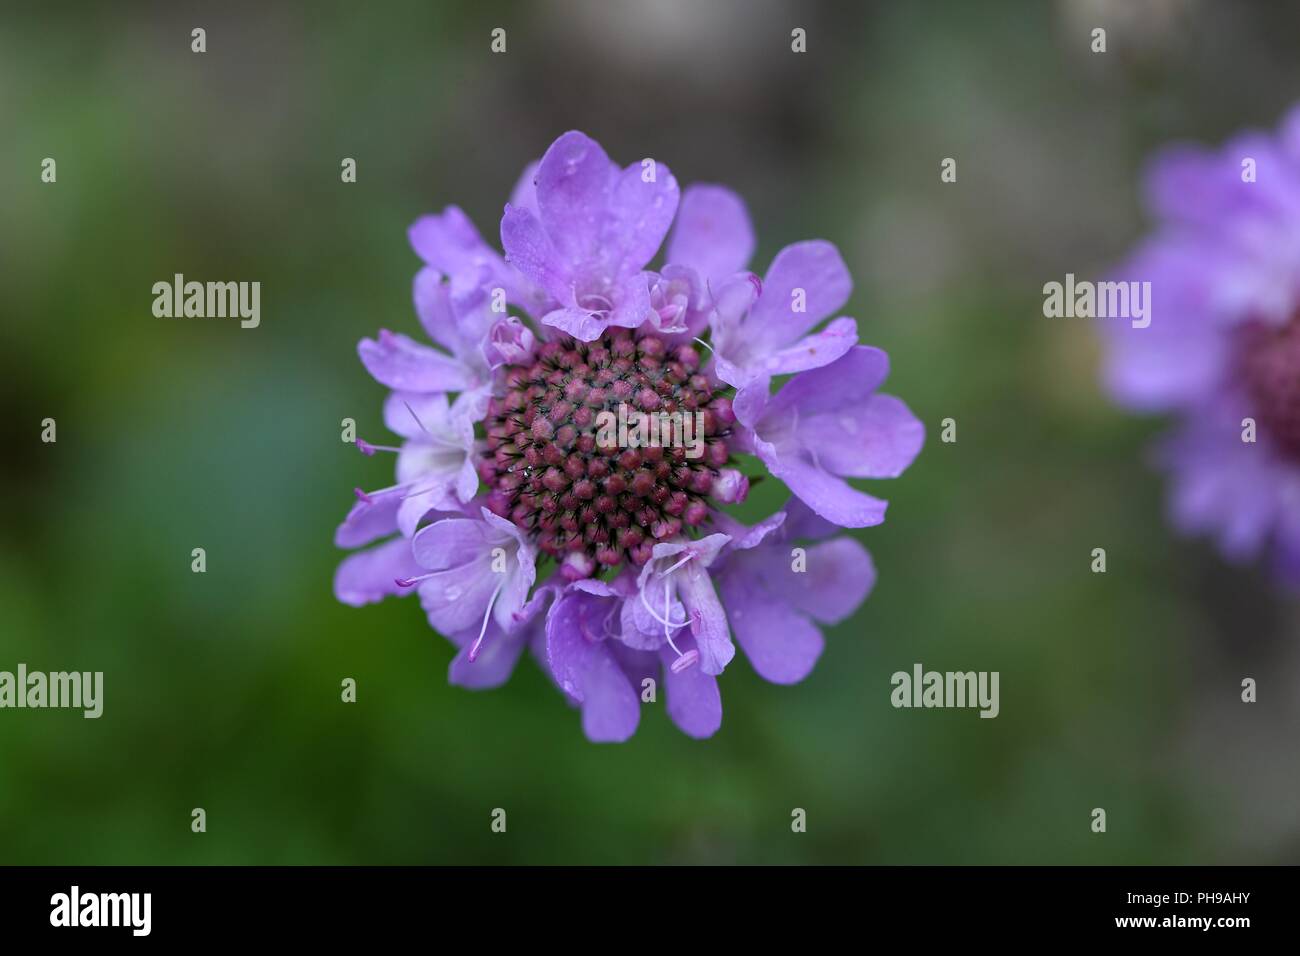 Flower of a Scabiosa lucida Stock Photo